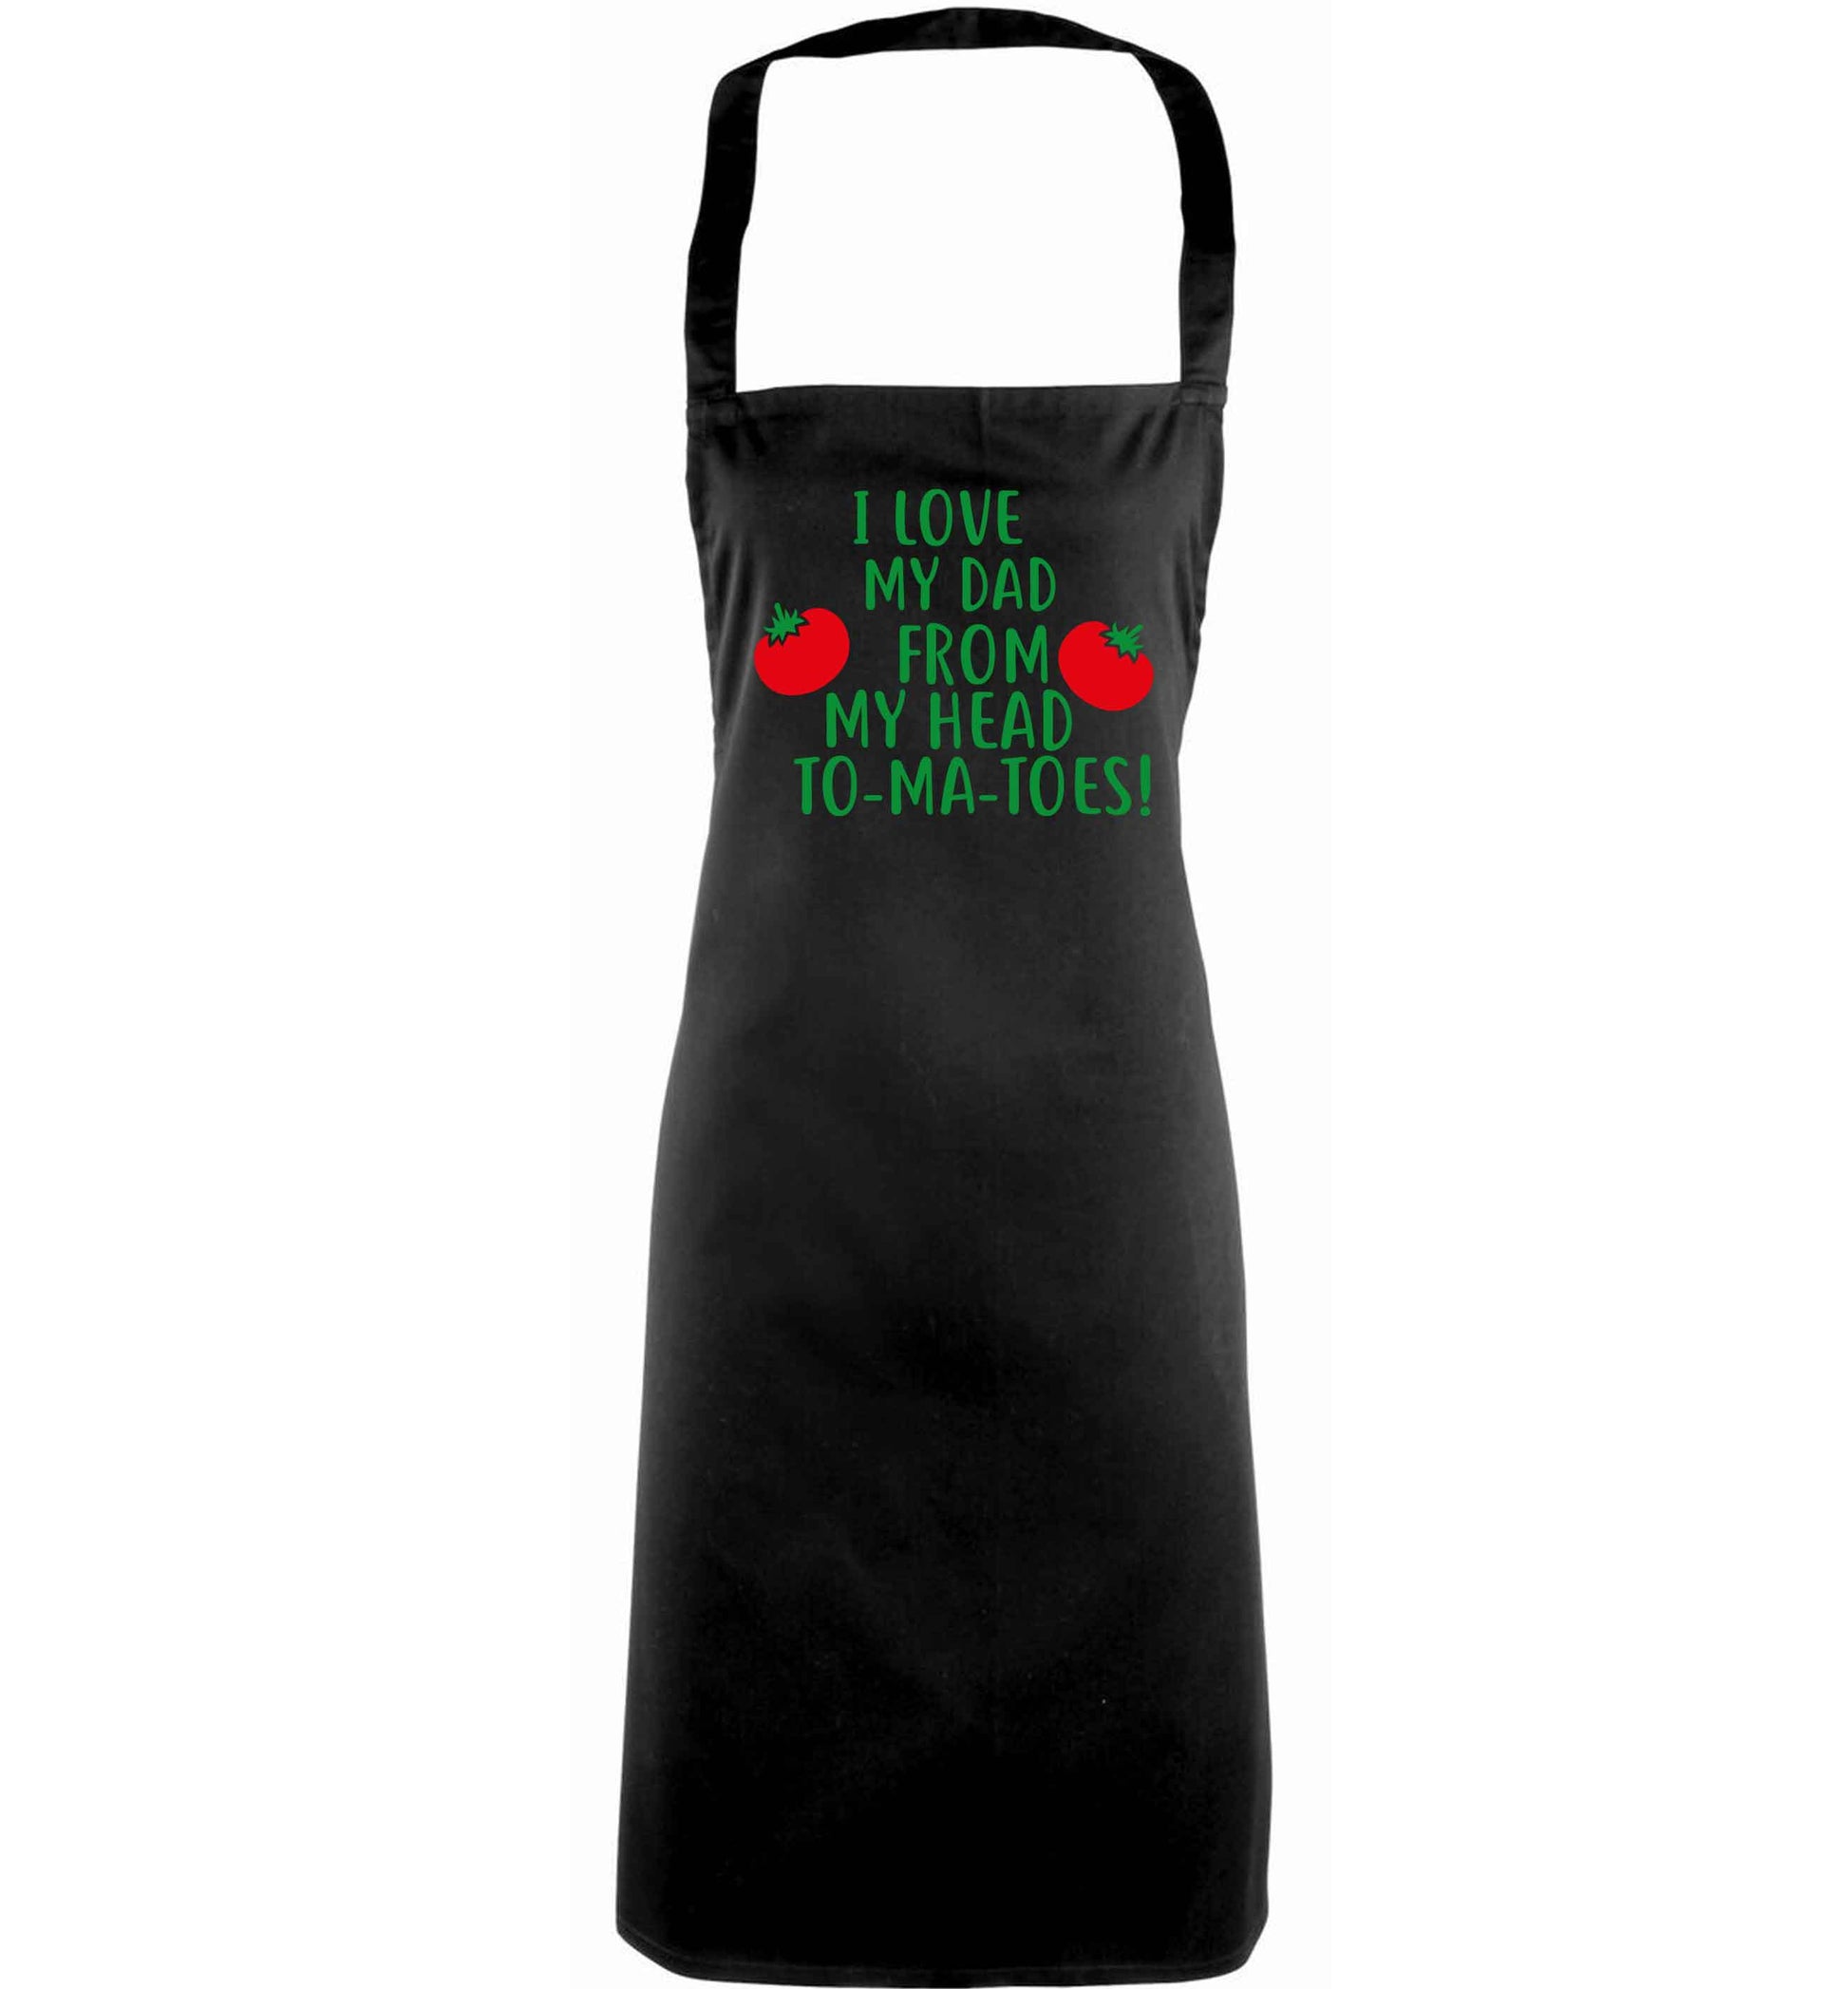 I love my dad from my head to-ma-toes adults black apron